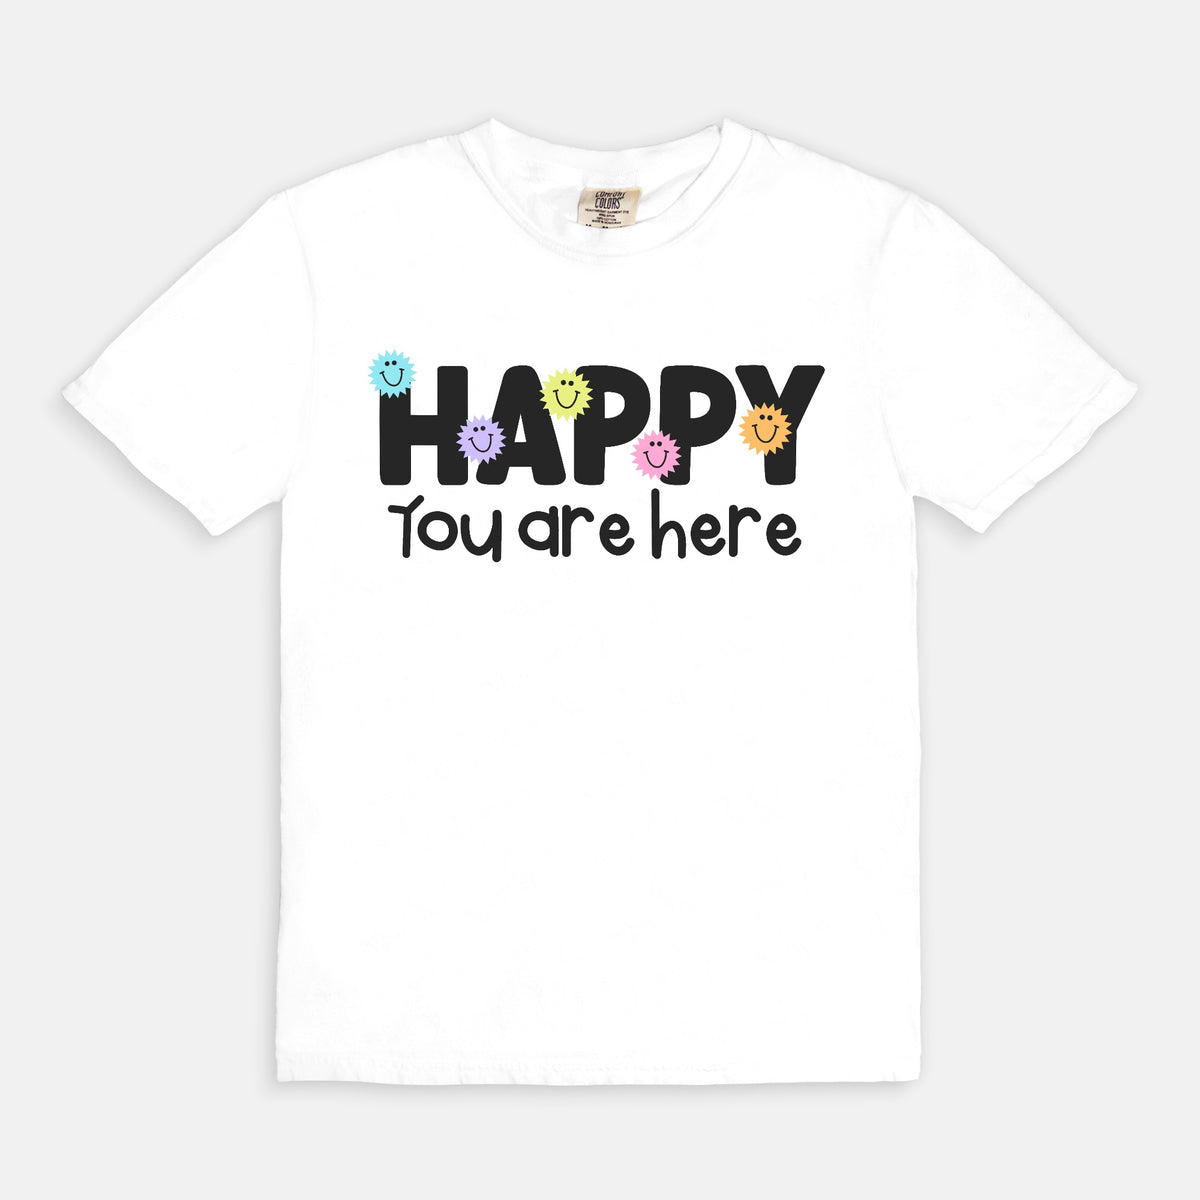 Happy You Are Here Tee